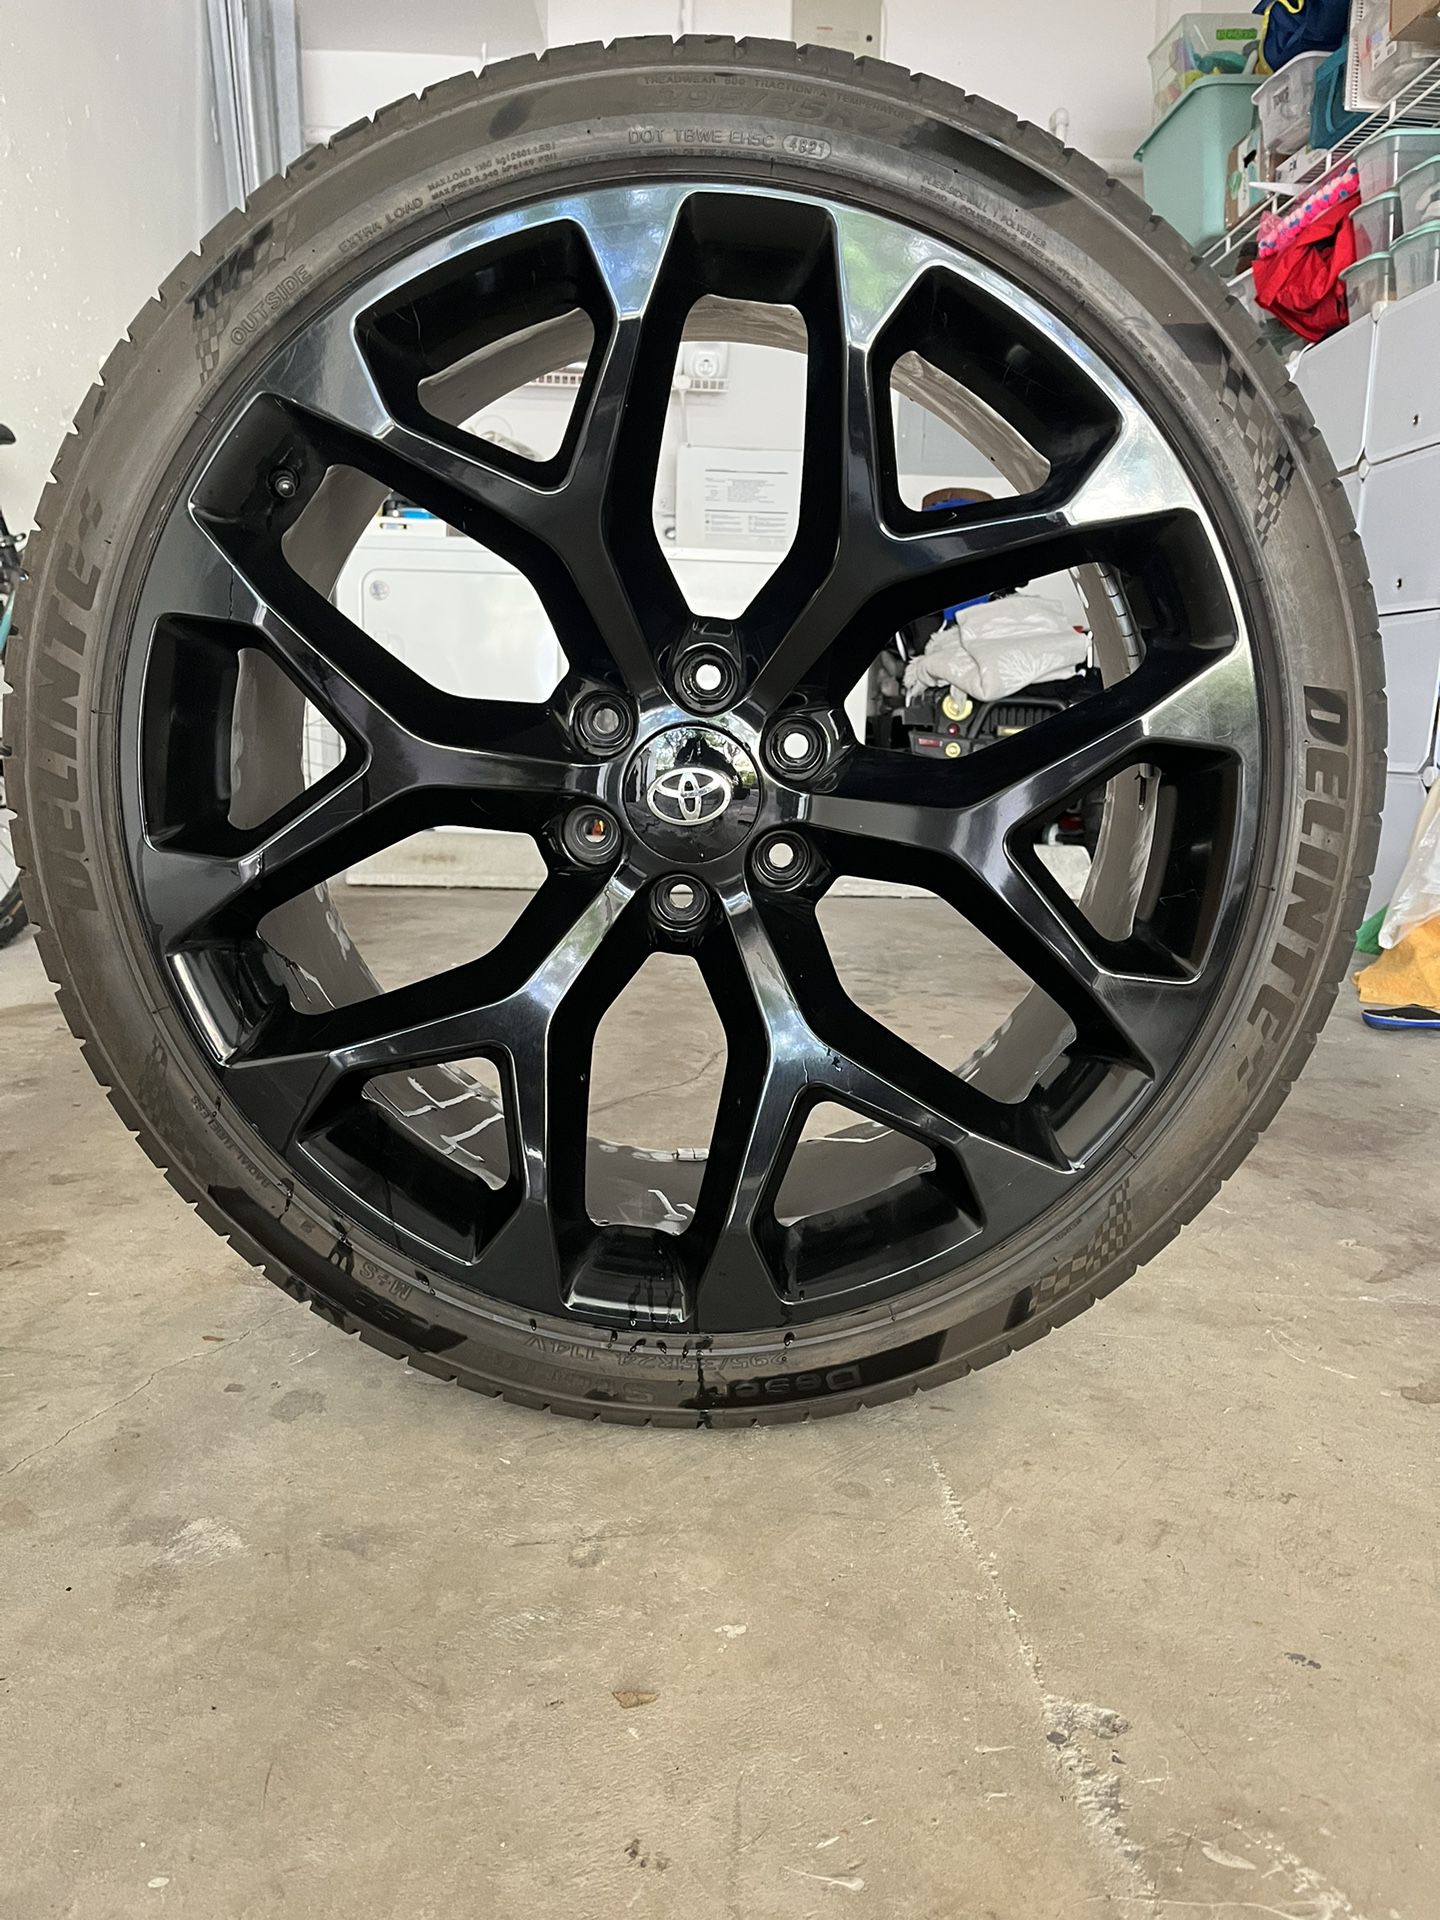 24 in Toyota custom wheels and tires 295/35R/24 (Set of 4)